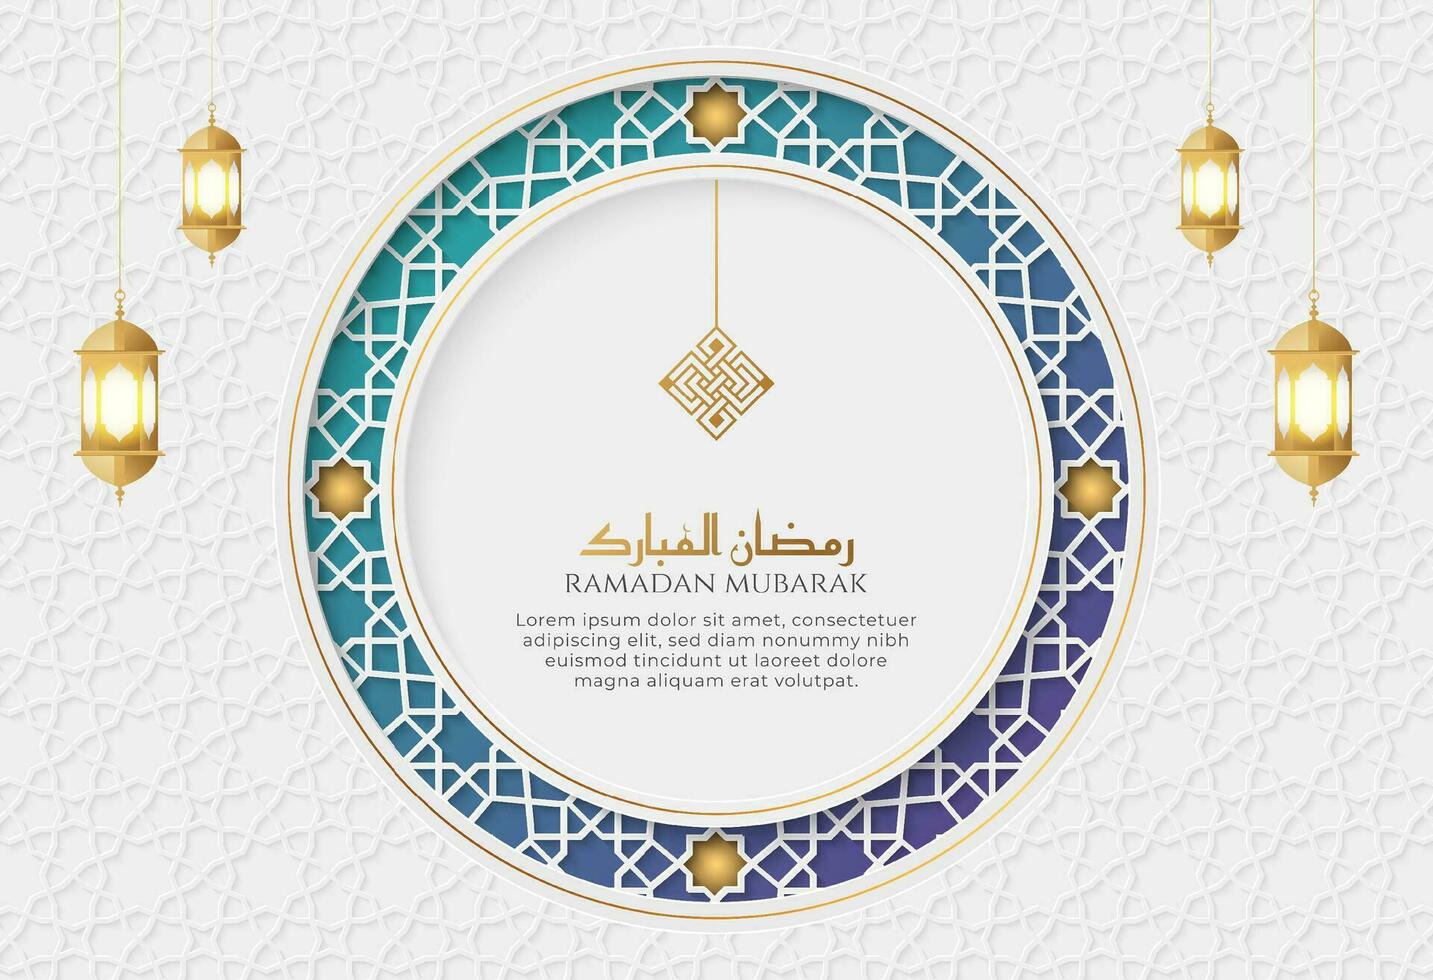 Ramadan Kareem White and Blue Luxury Islamic Background with Decorative Ornament Frame and Lanterns vector